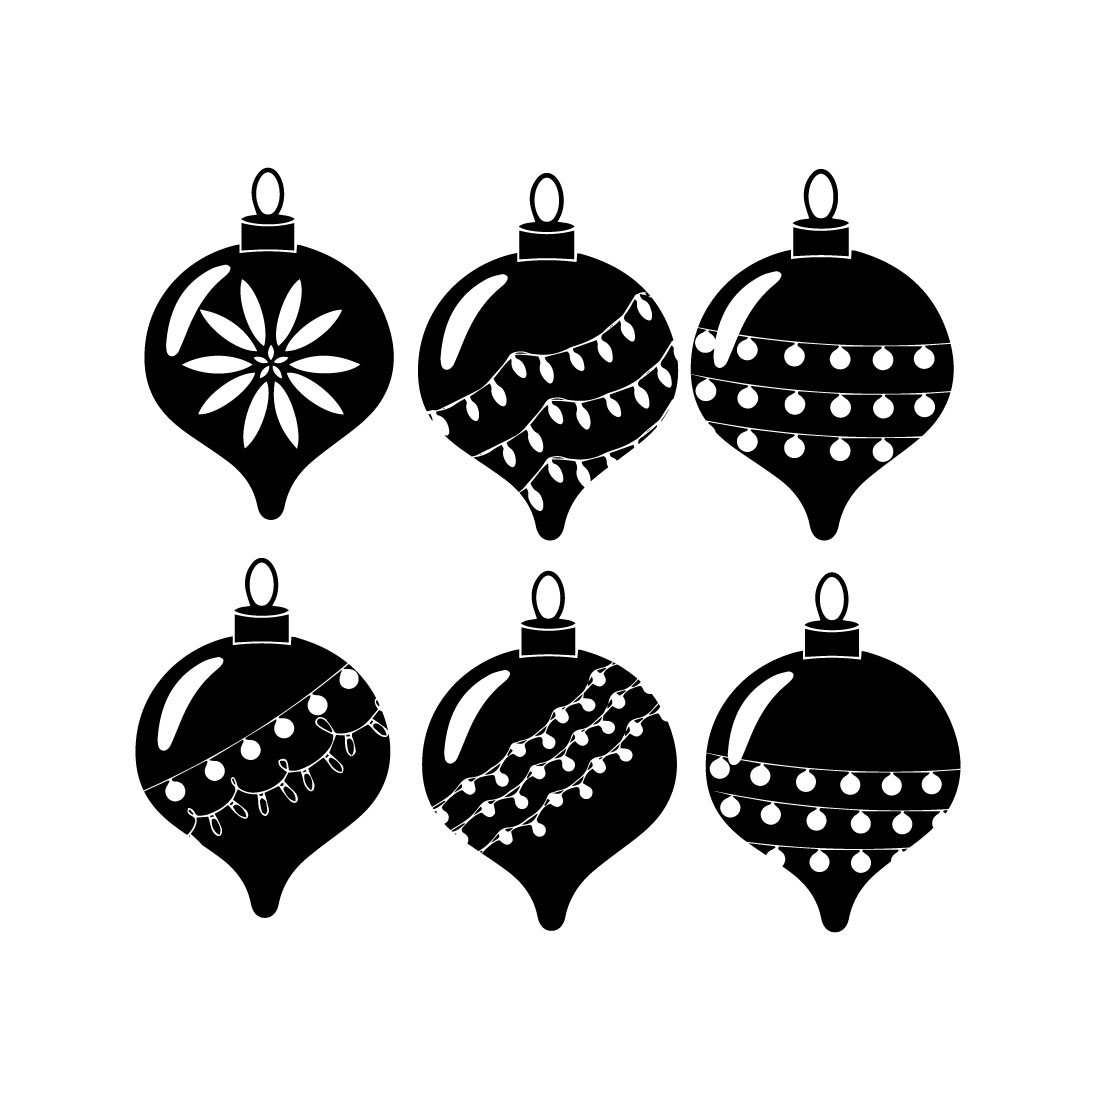 A Pack of Black Irresistible Christmas Ornament Images